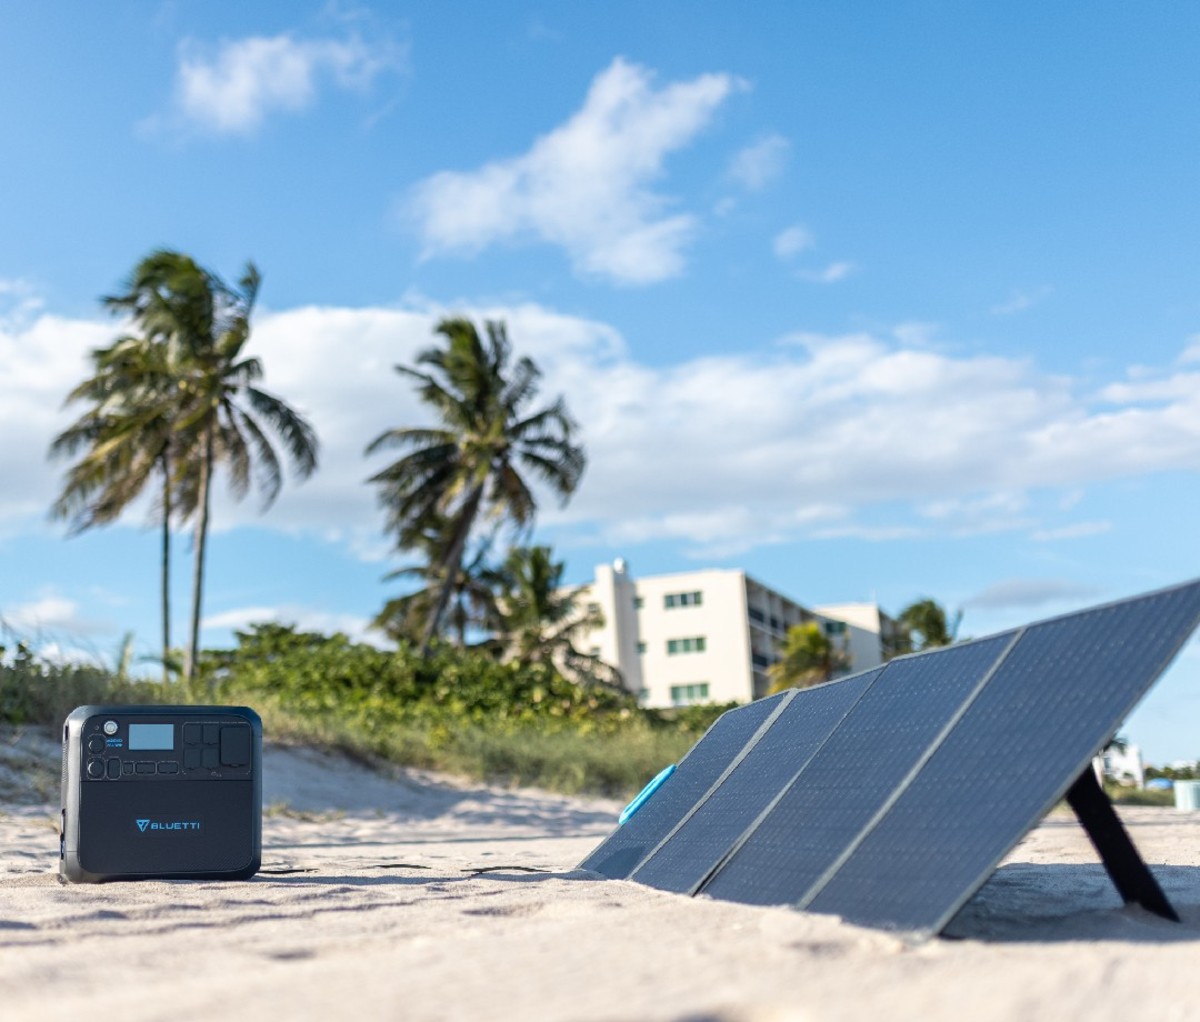 Open solar panels set up on the beach next to Bluetti portable power station